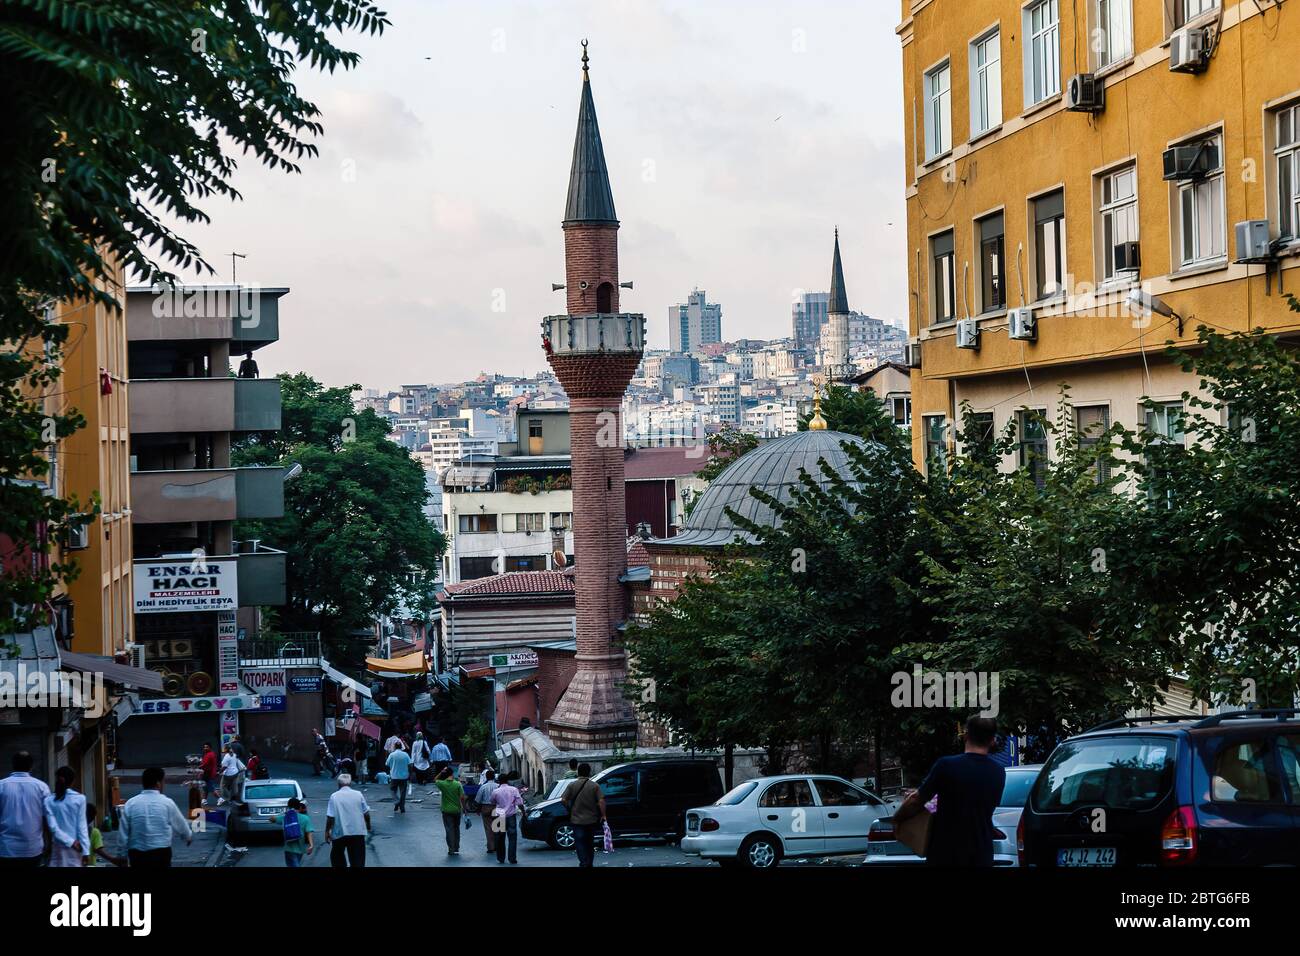 A small street with shops and a mosque in Eminonu District, Istanbul Stock Photo